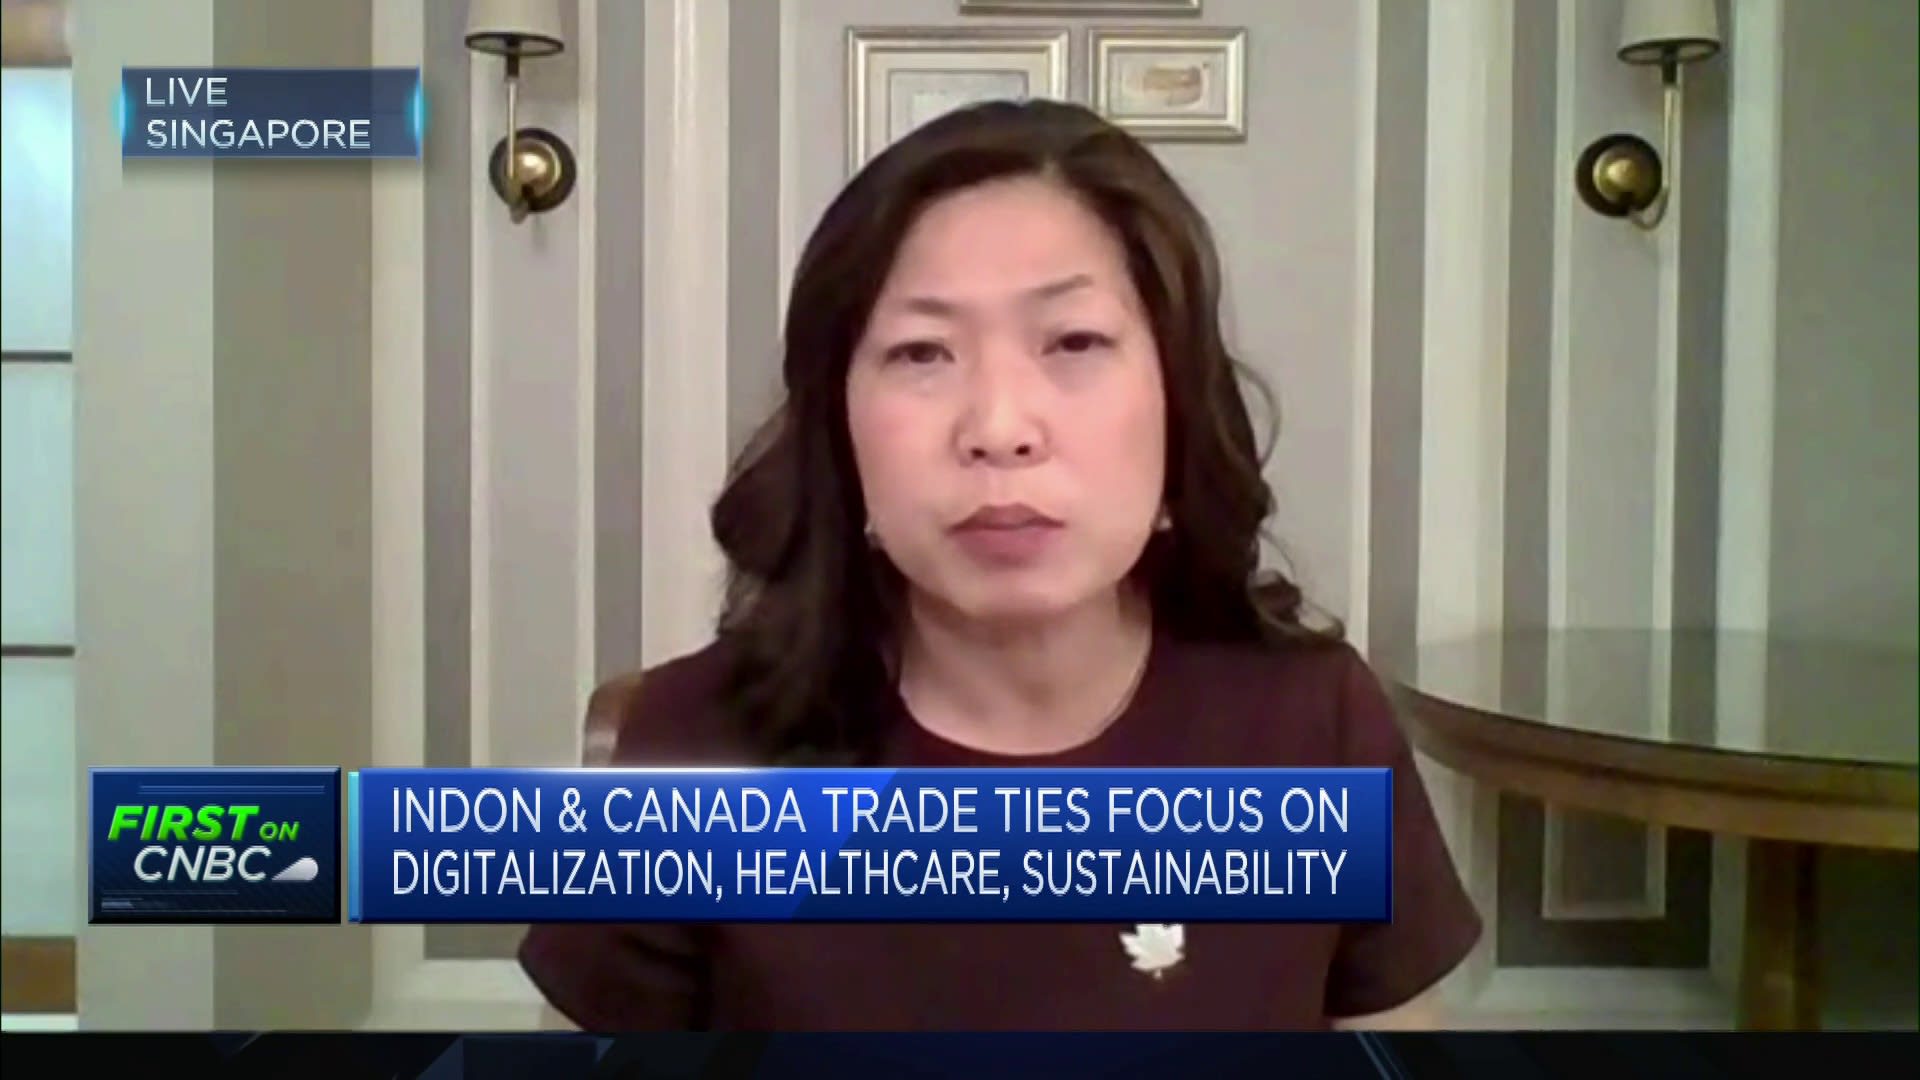 Canada will complement the trade work U.S. is doing in Asia, says Canadian minister